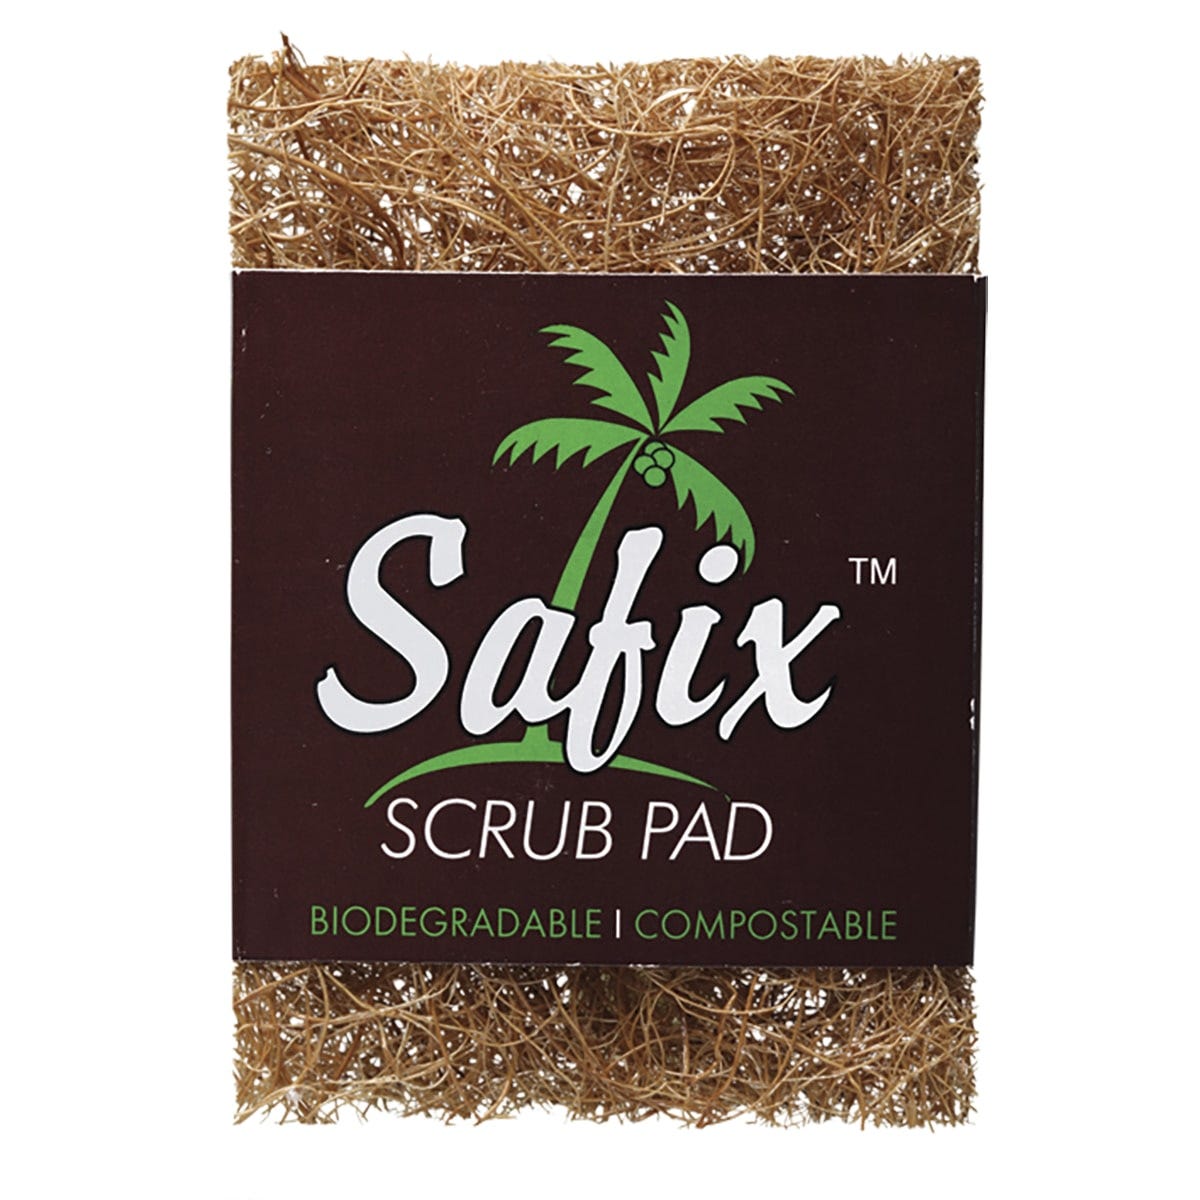 Safix Scrub Pad Small Biodegradable & Compostable - Dr Earth - Cleaning